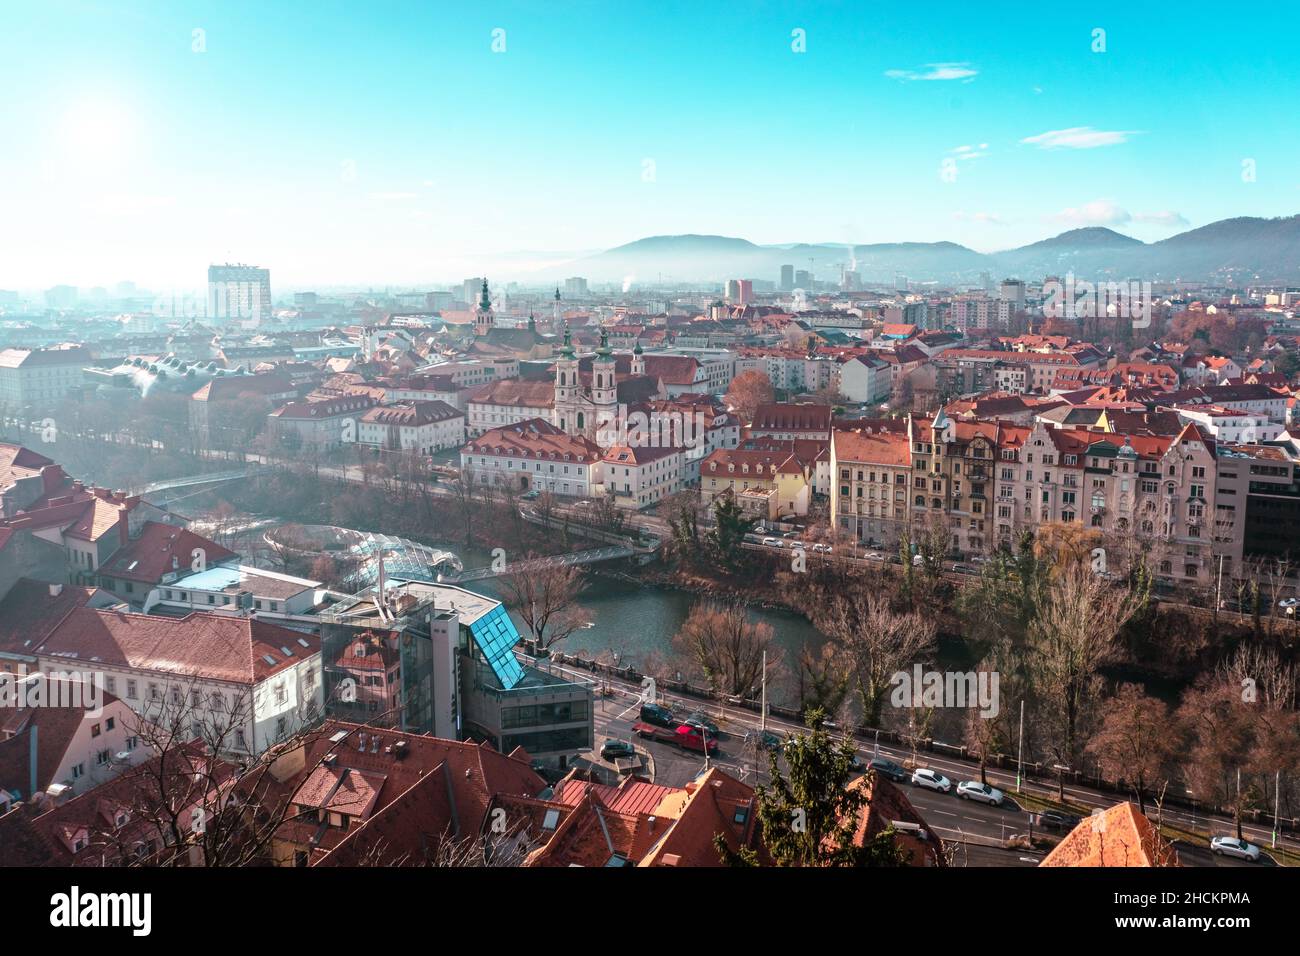 Graz and Mur river view. Famous city in Styria, Austria during winter. Stock Photo